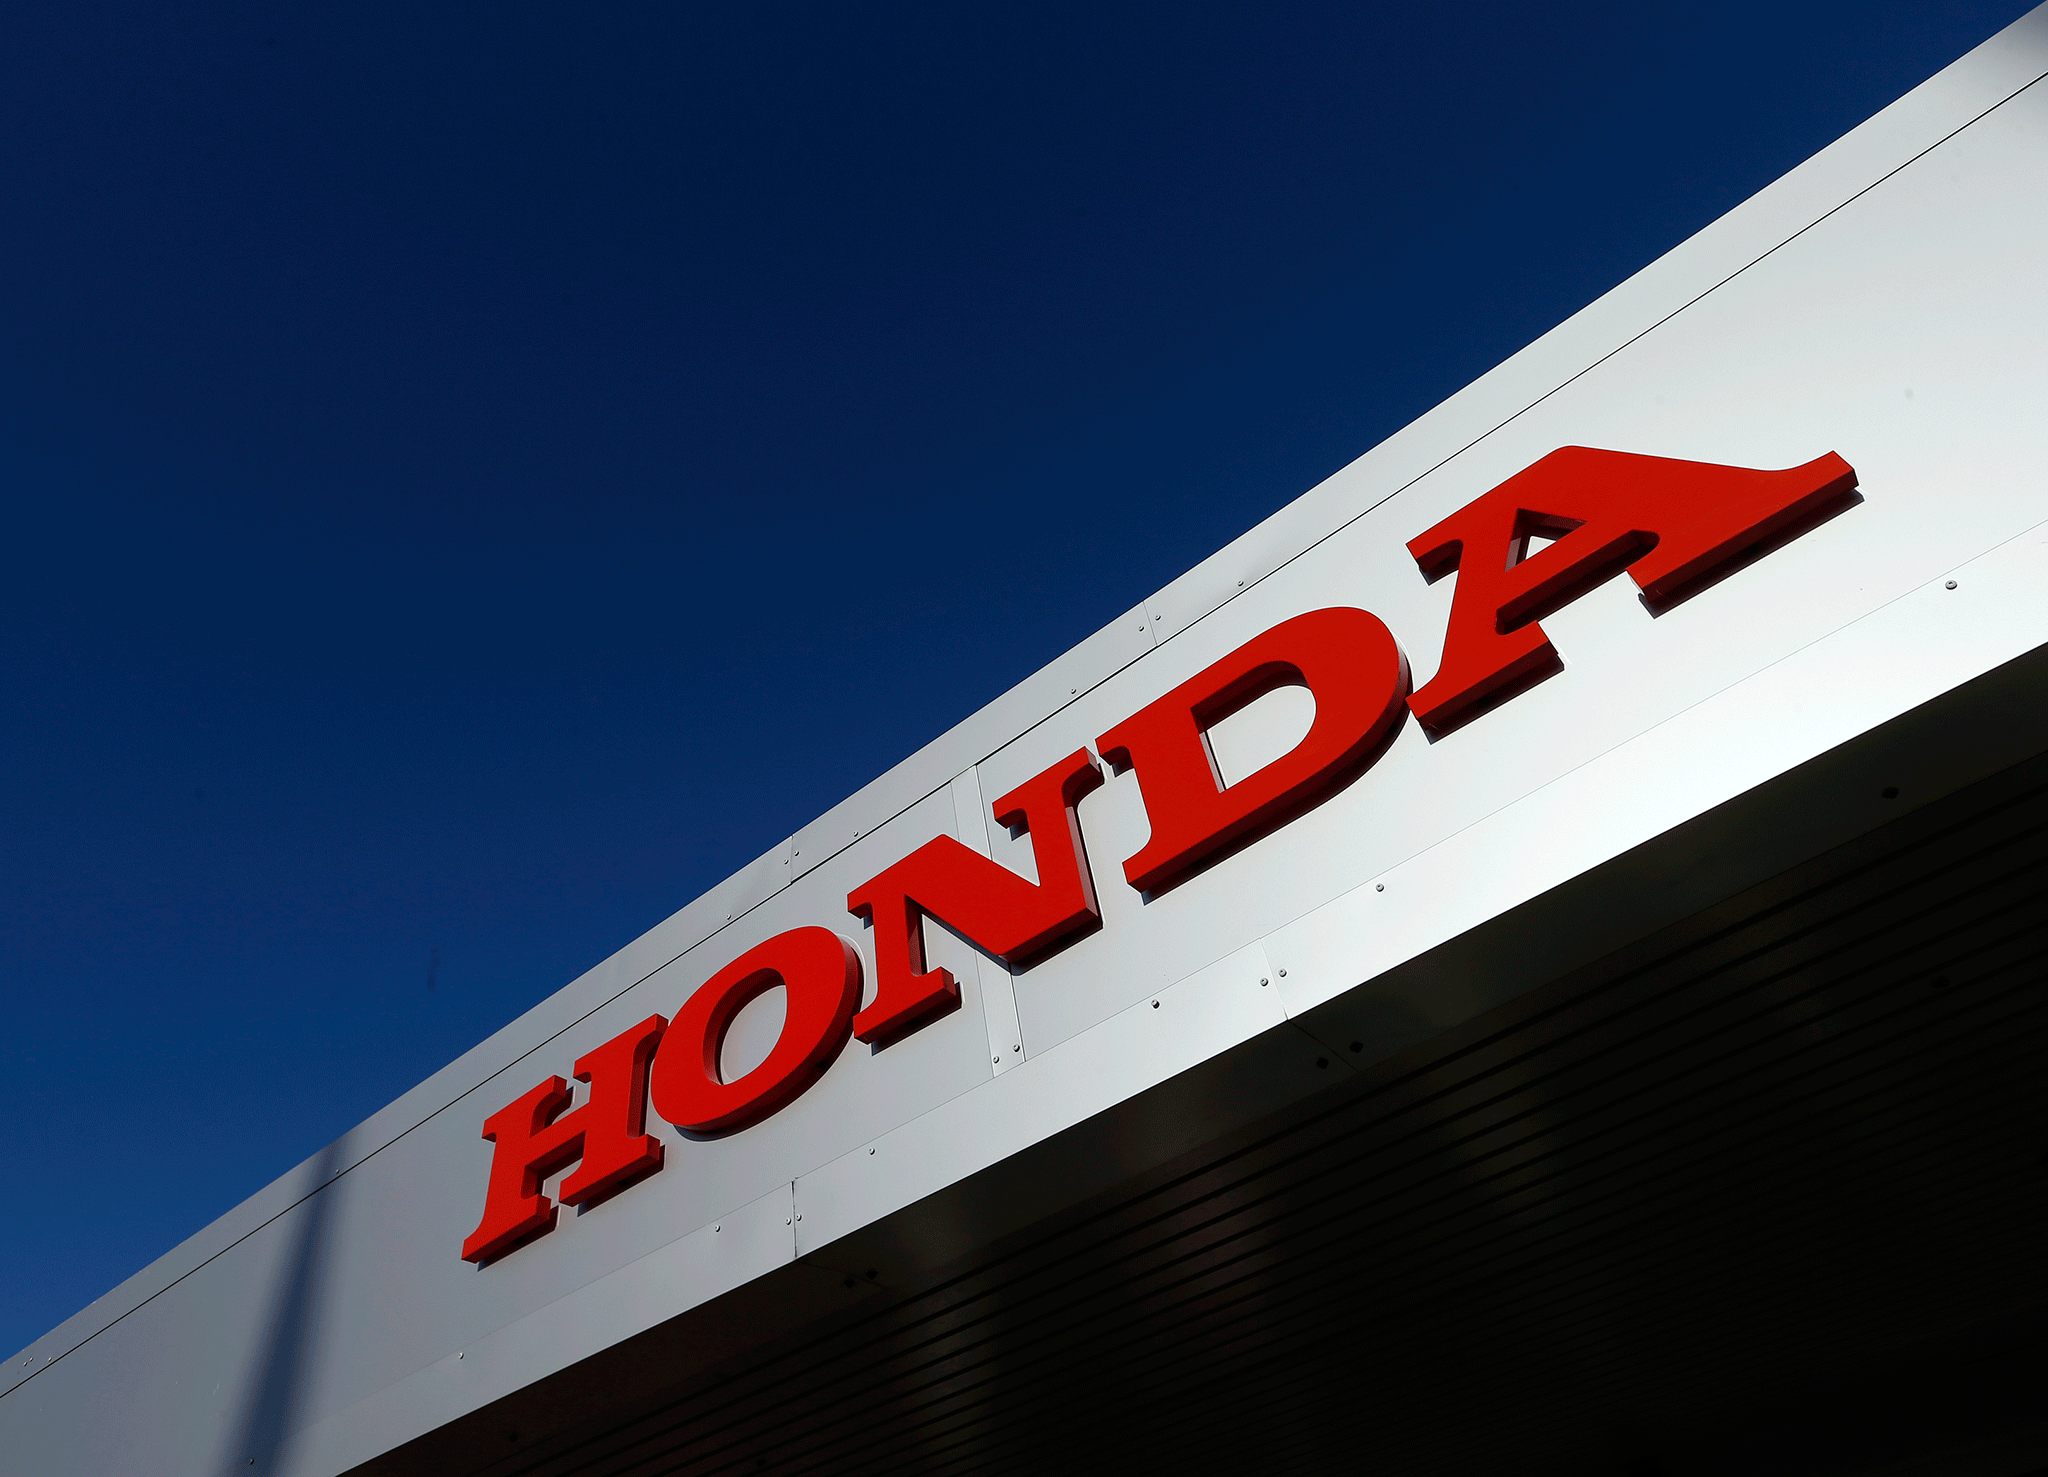 Honda forced to halt production after WannaCry cyberattack